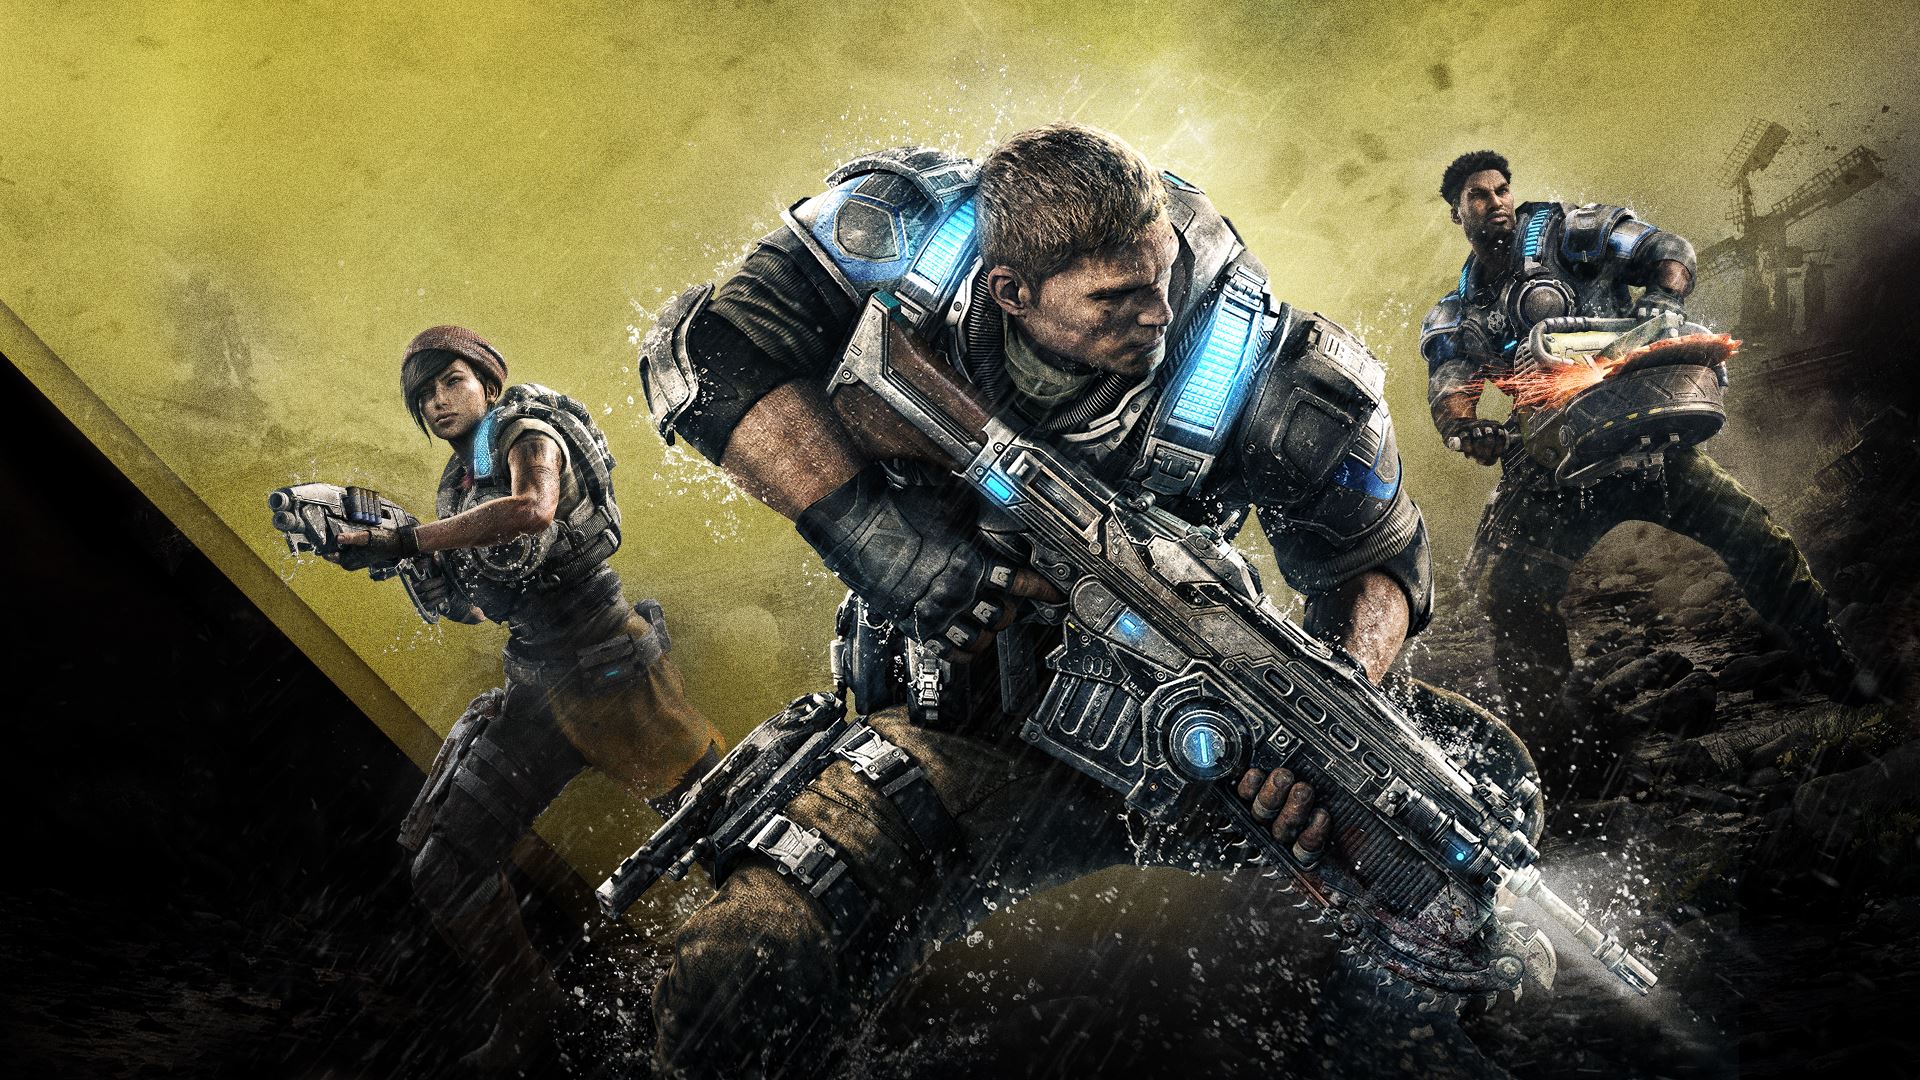 gears of war 4 wallpaper,action adventure game,shooter game,games,pc game,movie